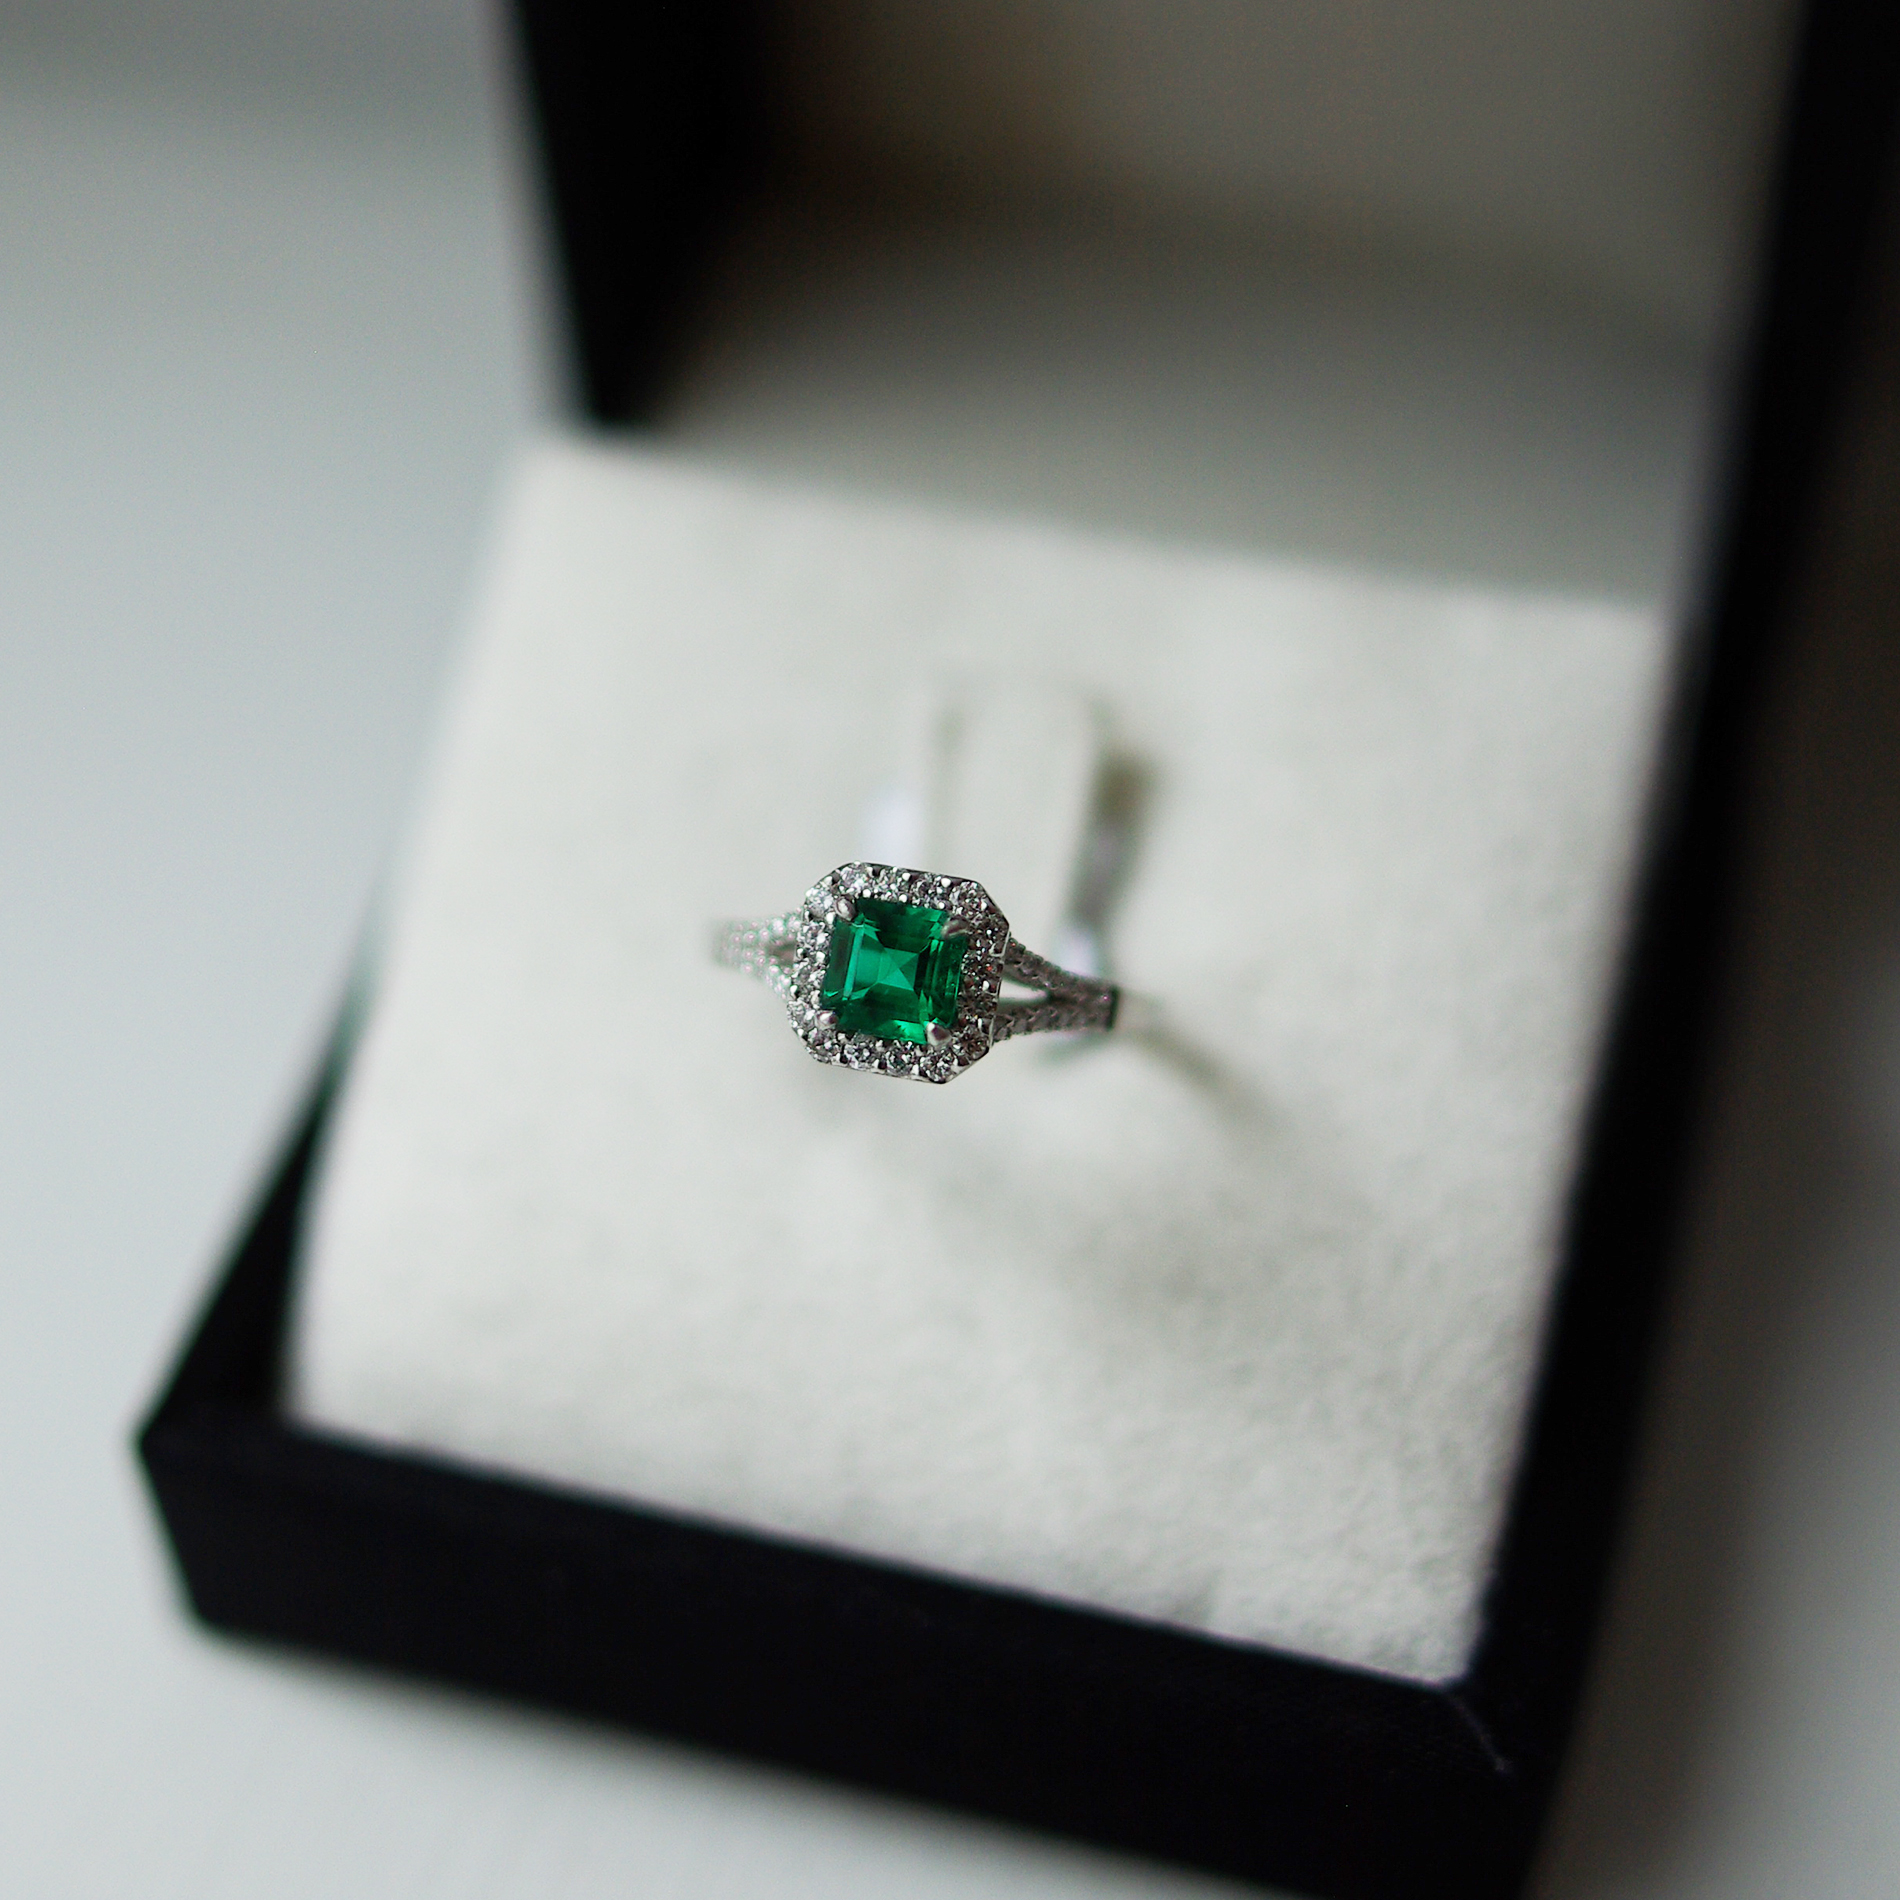 Square Emerald Cut Emerald Ring With Halo And Diamond Set Split Shoulders